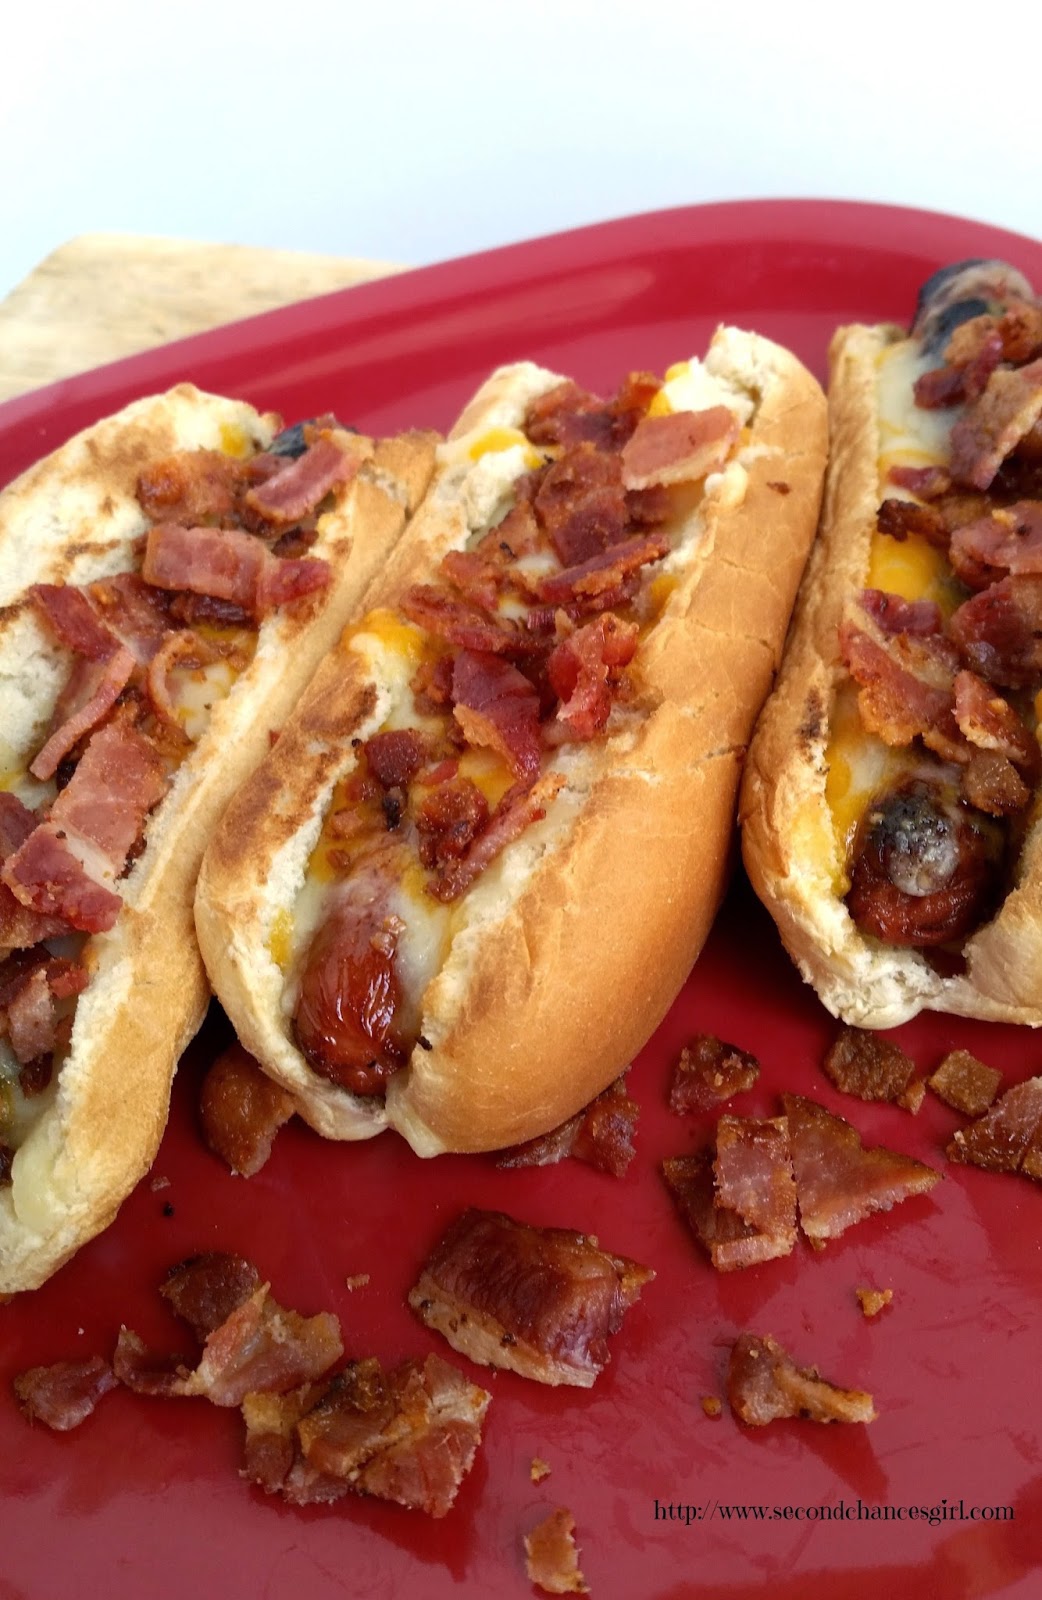 Bacon & Three Cheese Grilled Hot Dogs #PackedWithSavings #shop